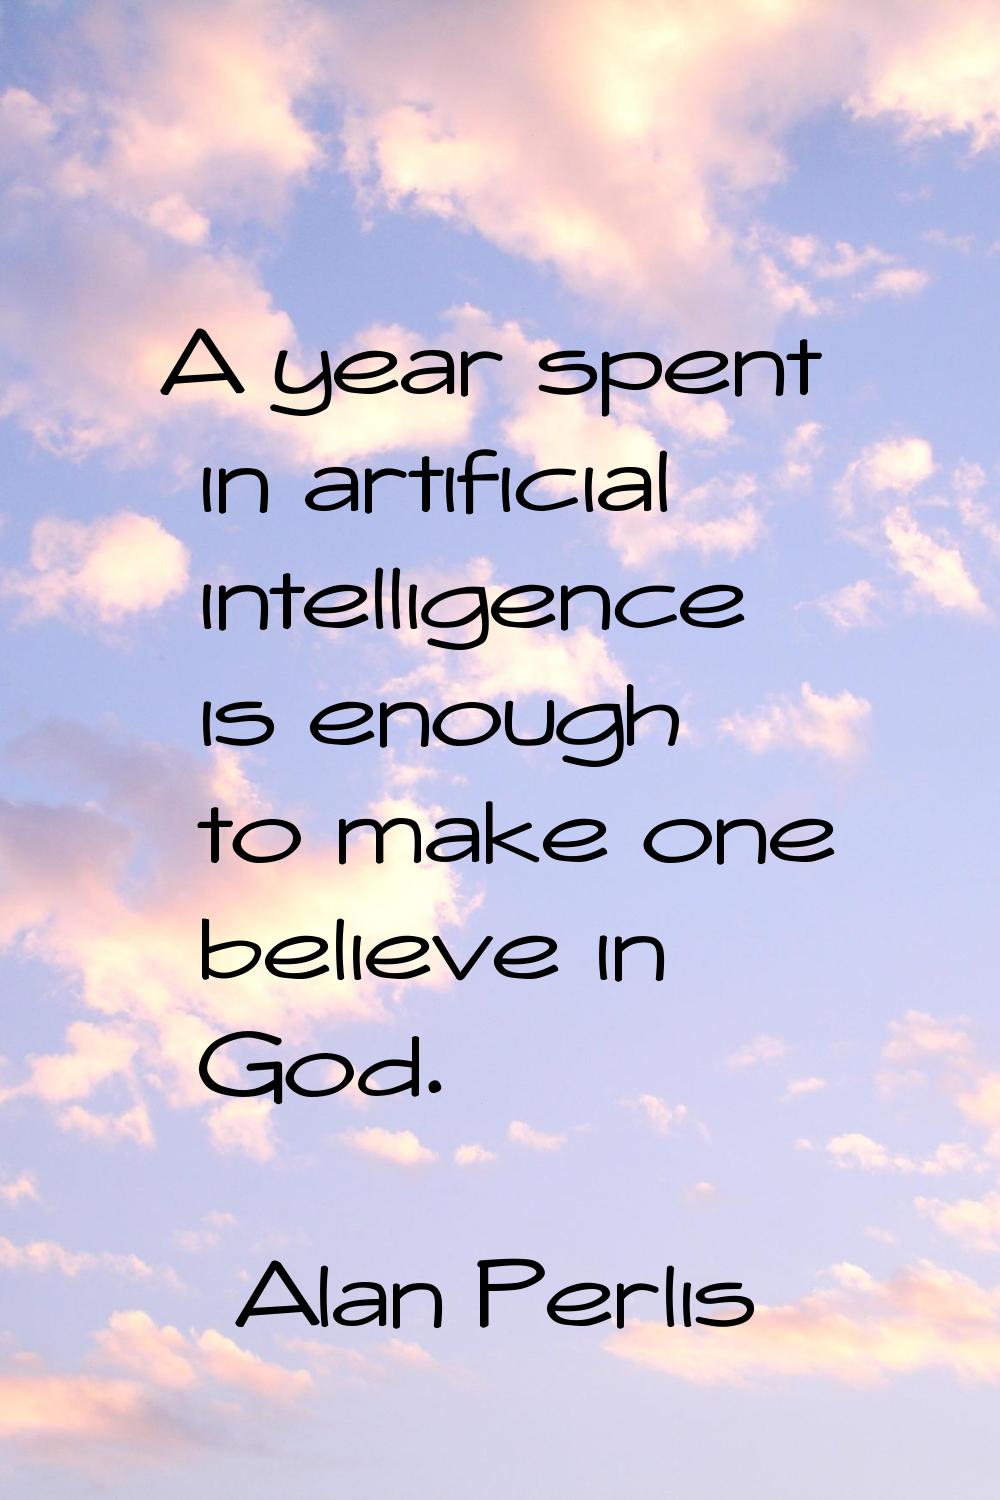 A year spent in artificial intelligence is enough to make one believe in God.